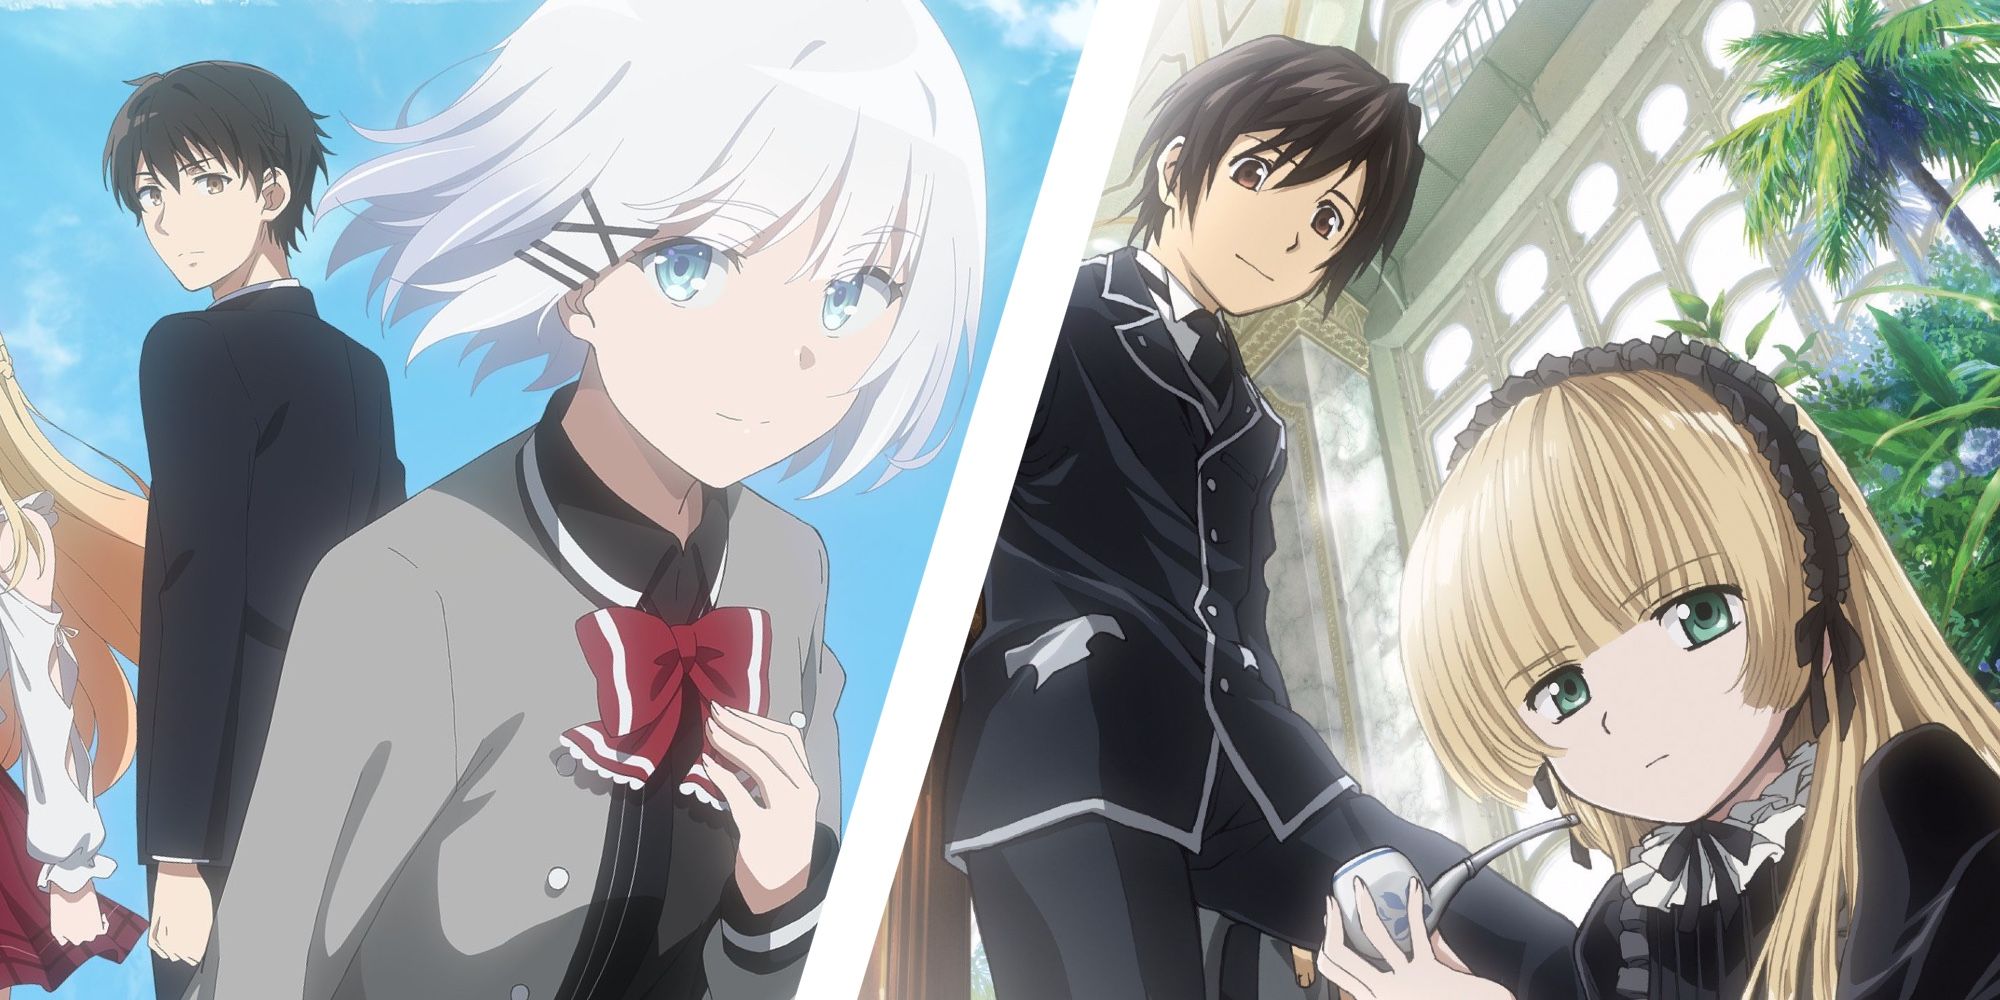 From left to right: Kimihiko Kimizuka and Siesta from The Detective Is Already Dead, and Kazuya Kujō and Victorique de Blois from Gosick.